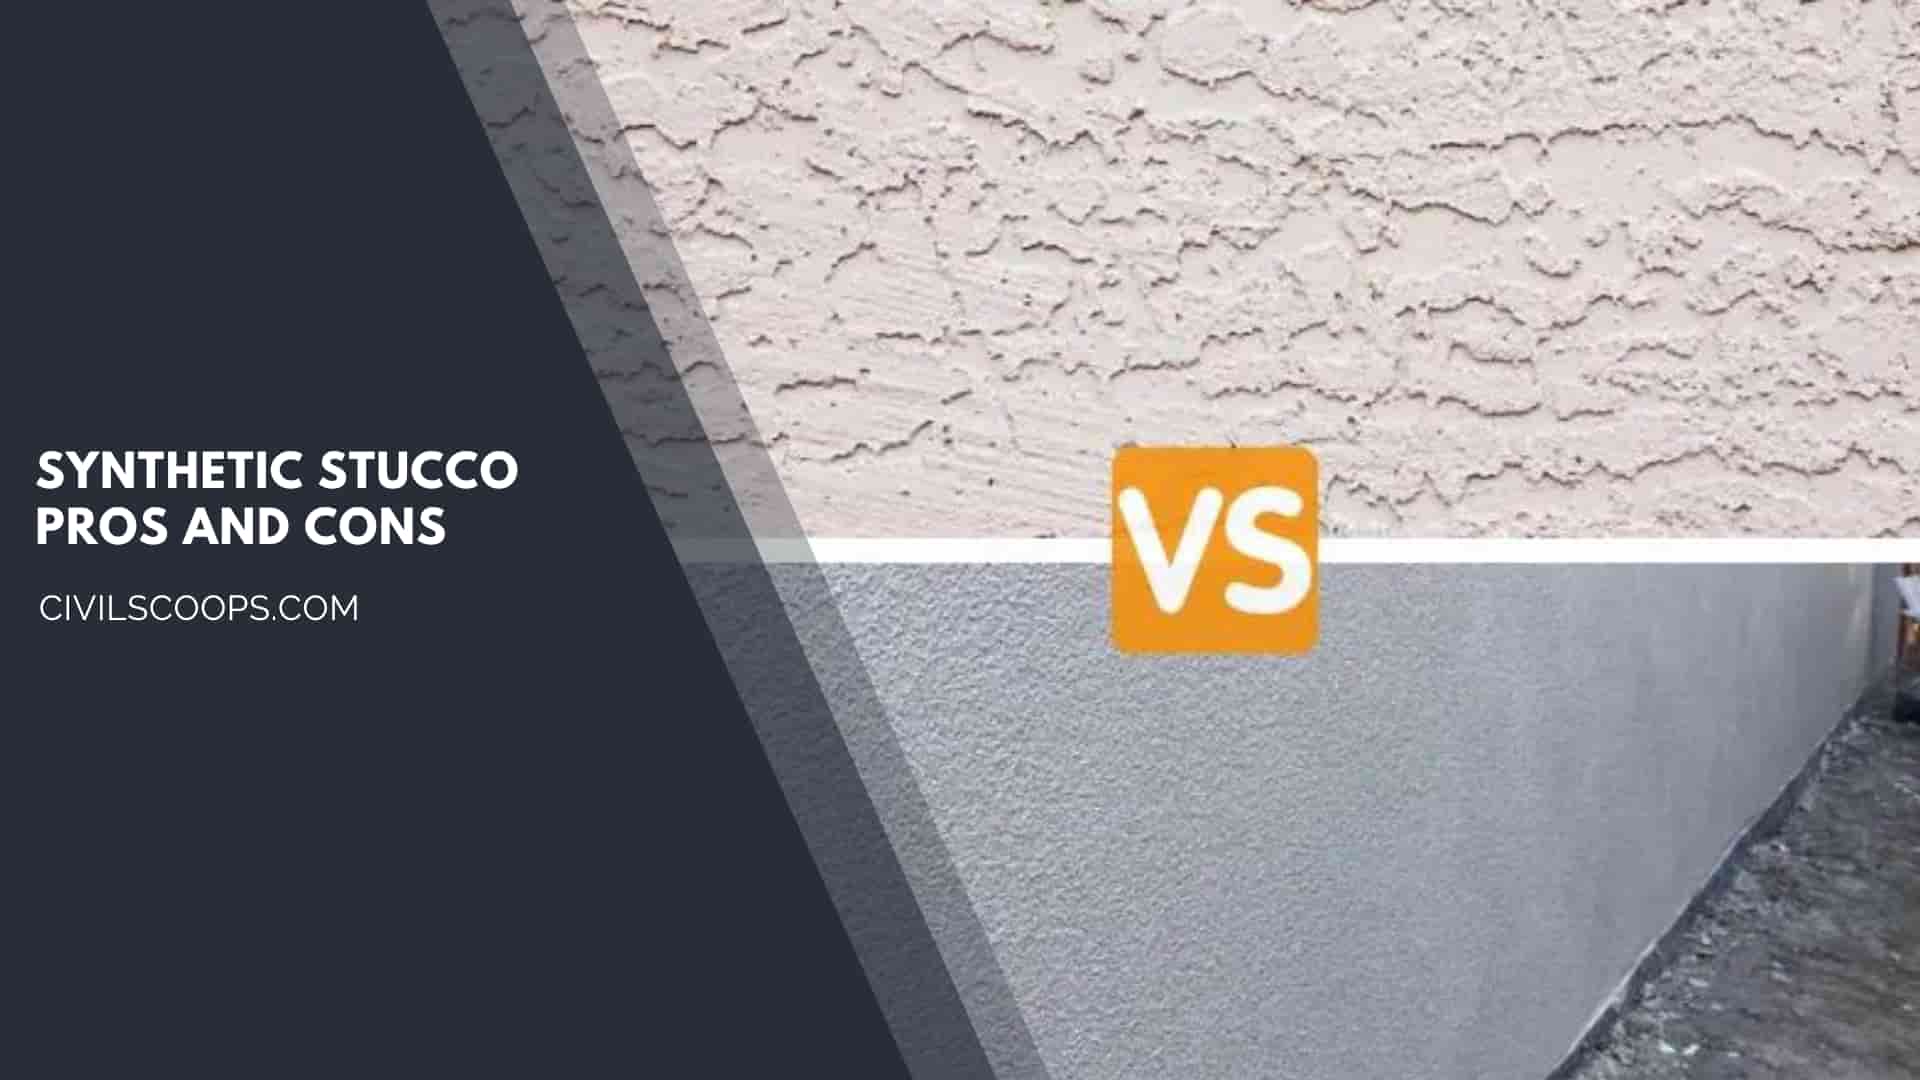 Synthetic Stucco Pros and Cons